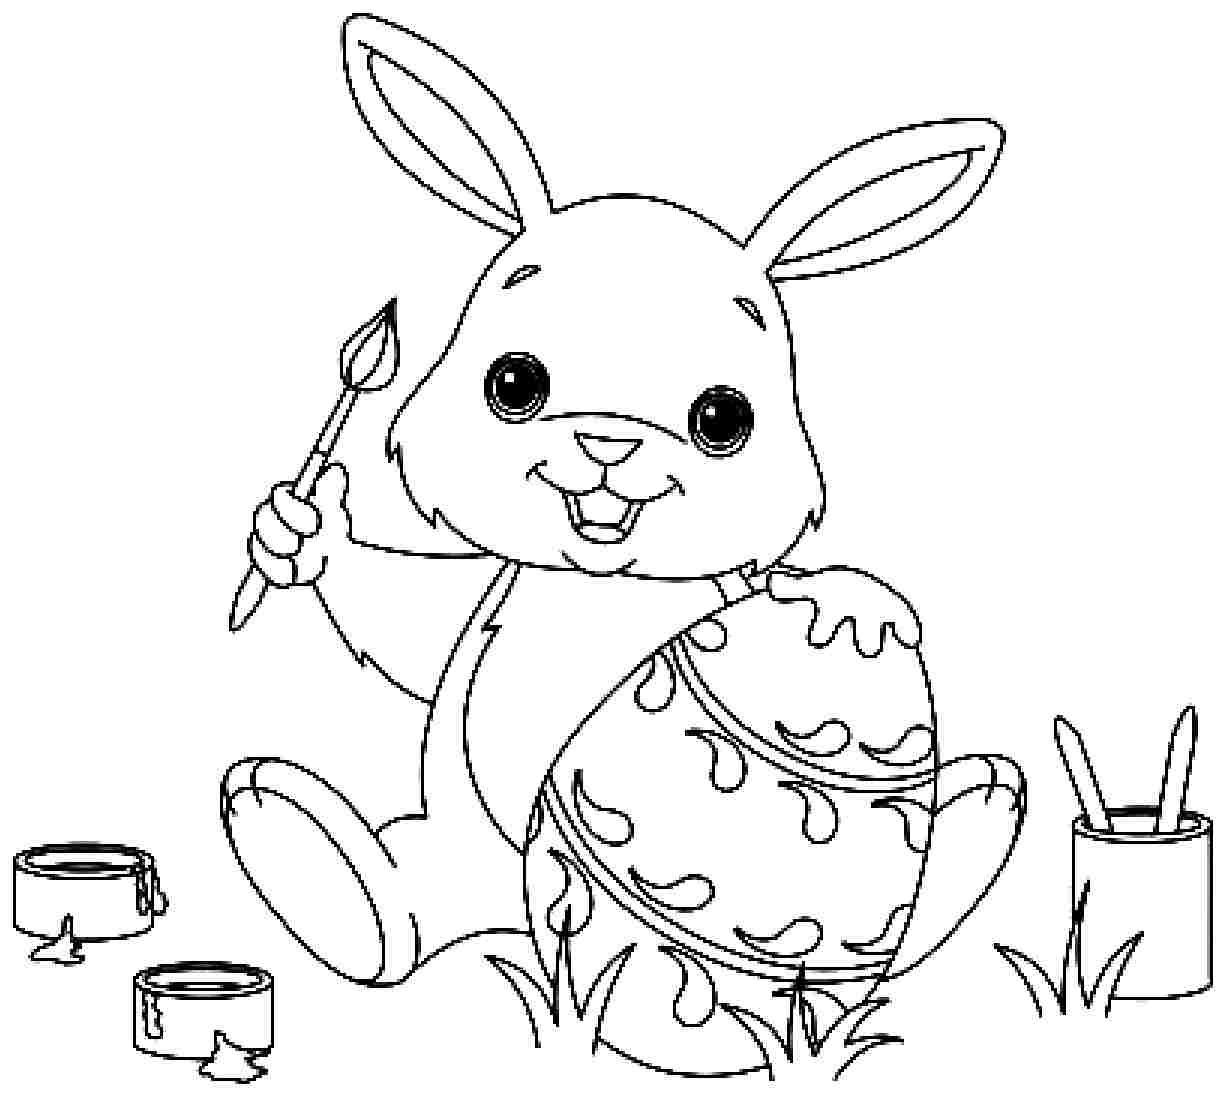 Bunny Coloring Pages For Adults at GetColorings.com | Free printable colorings pages to print